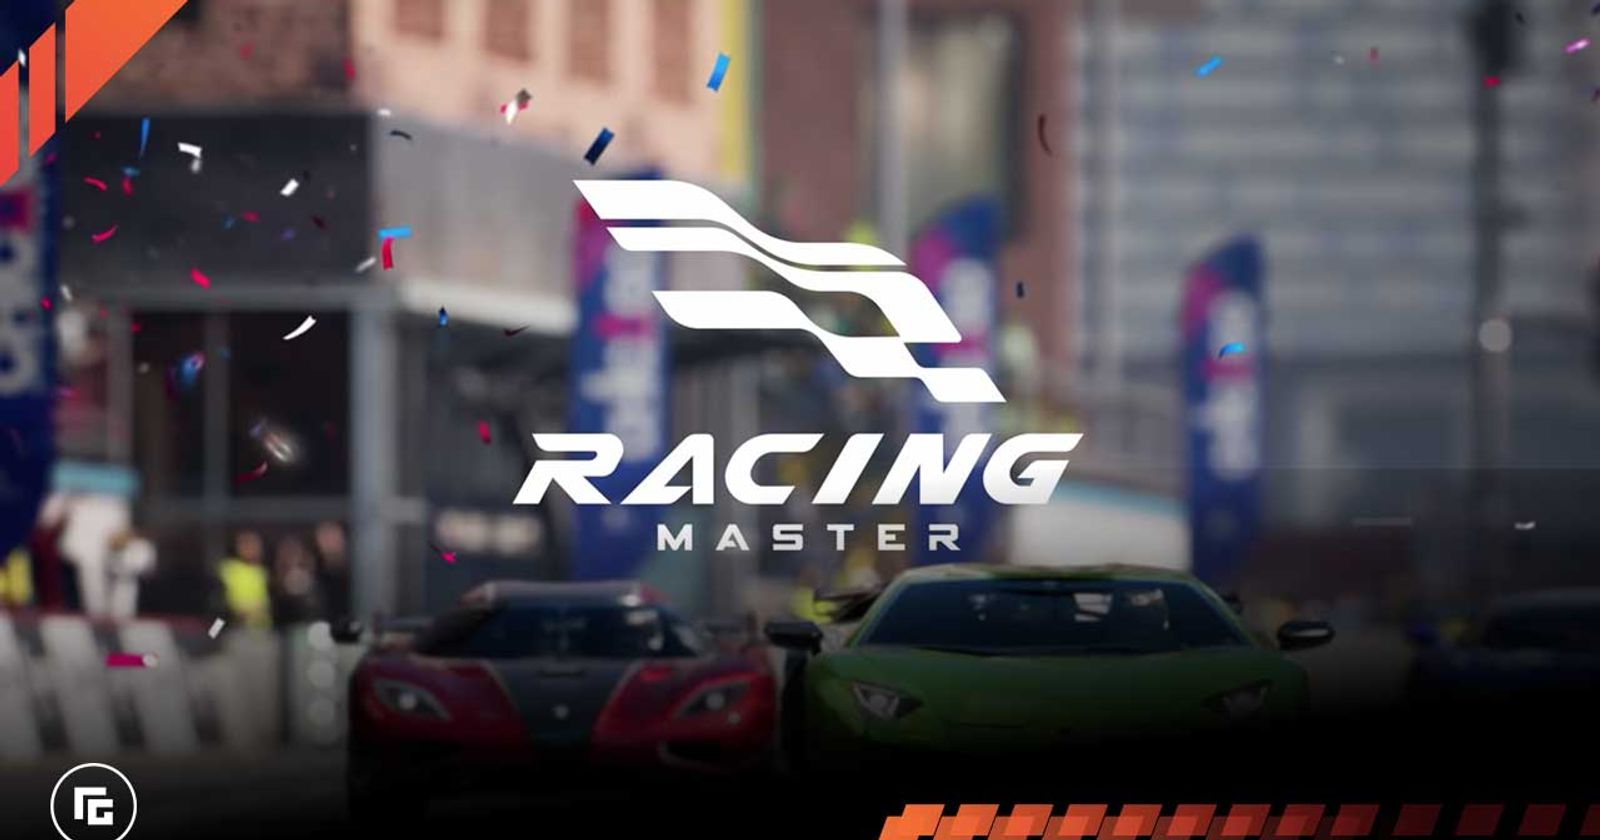 A new mobile game with all camera views 'Racing Master' is now launched